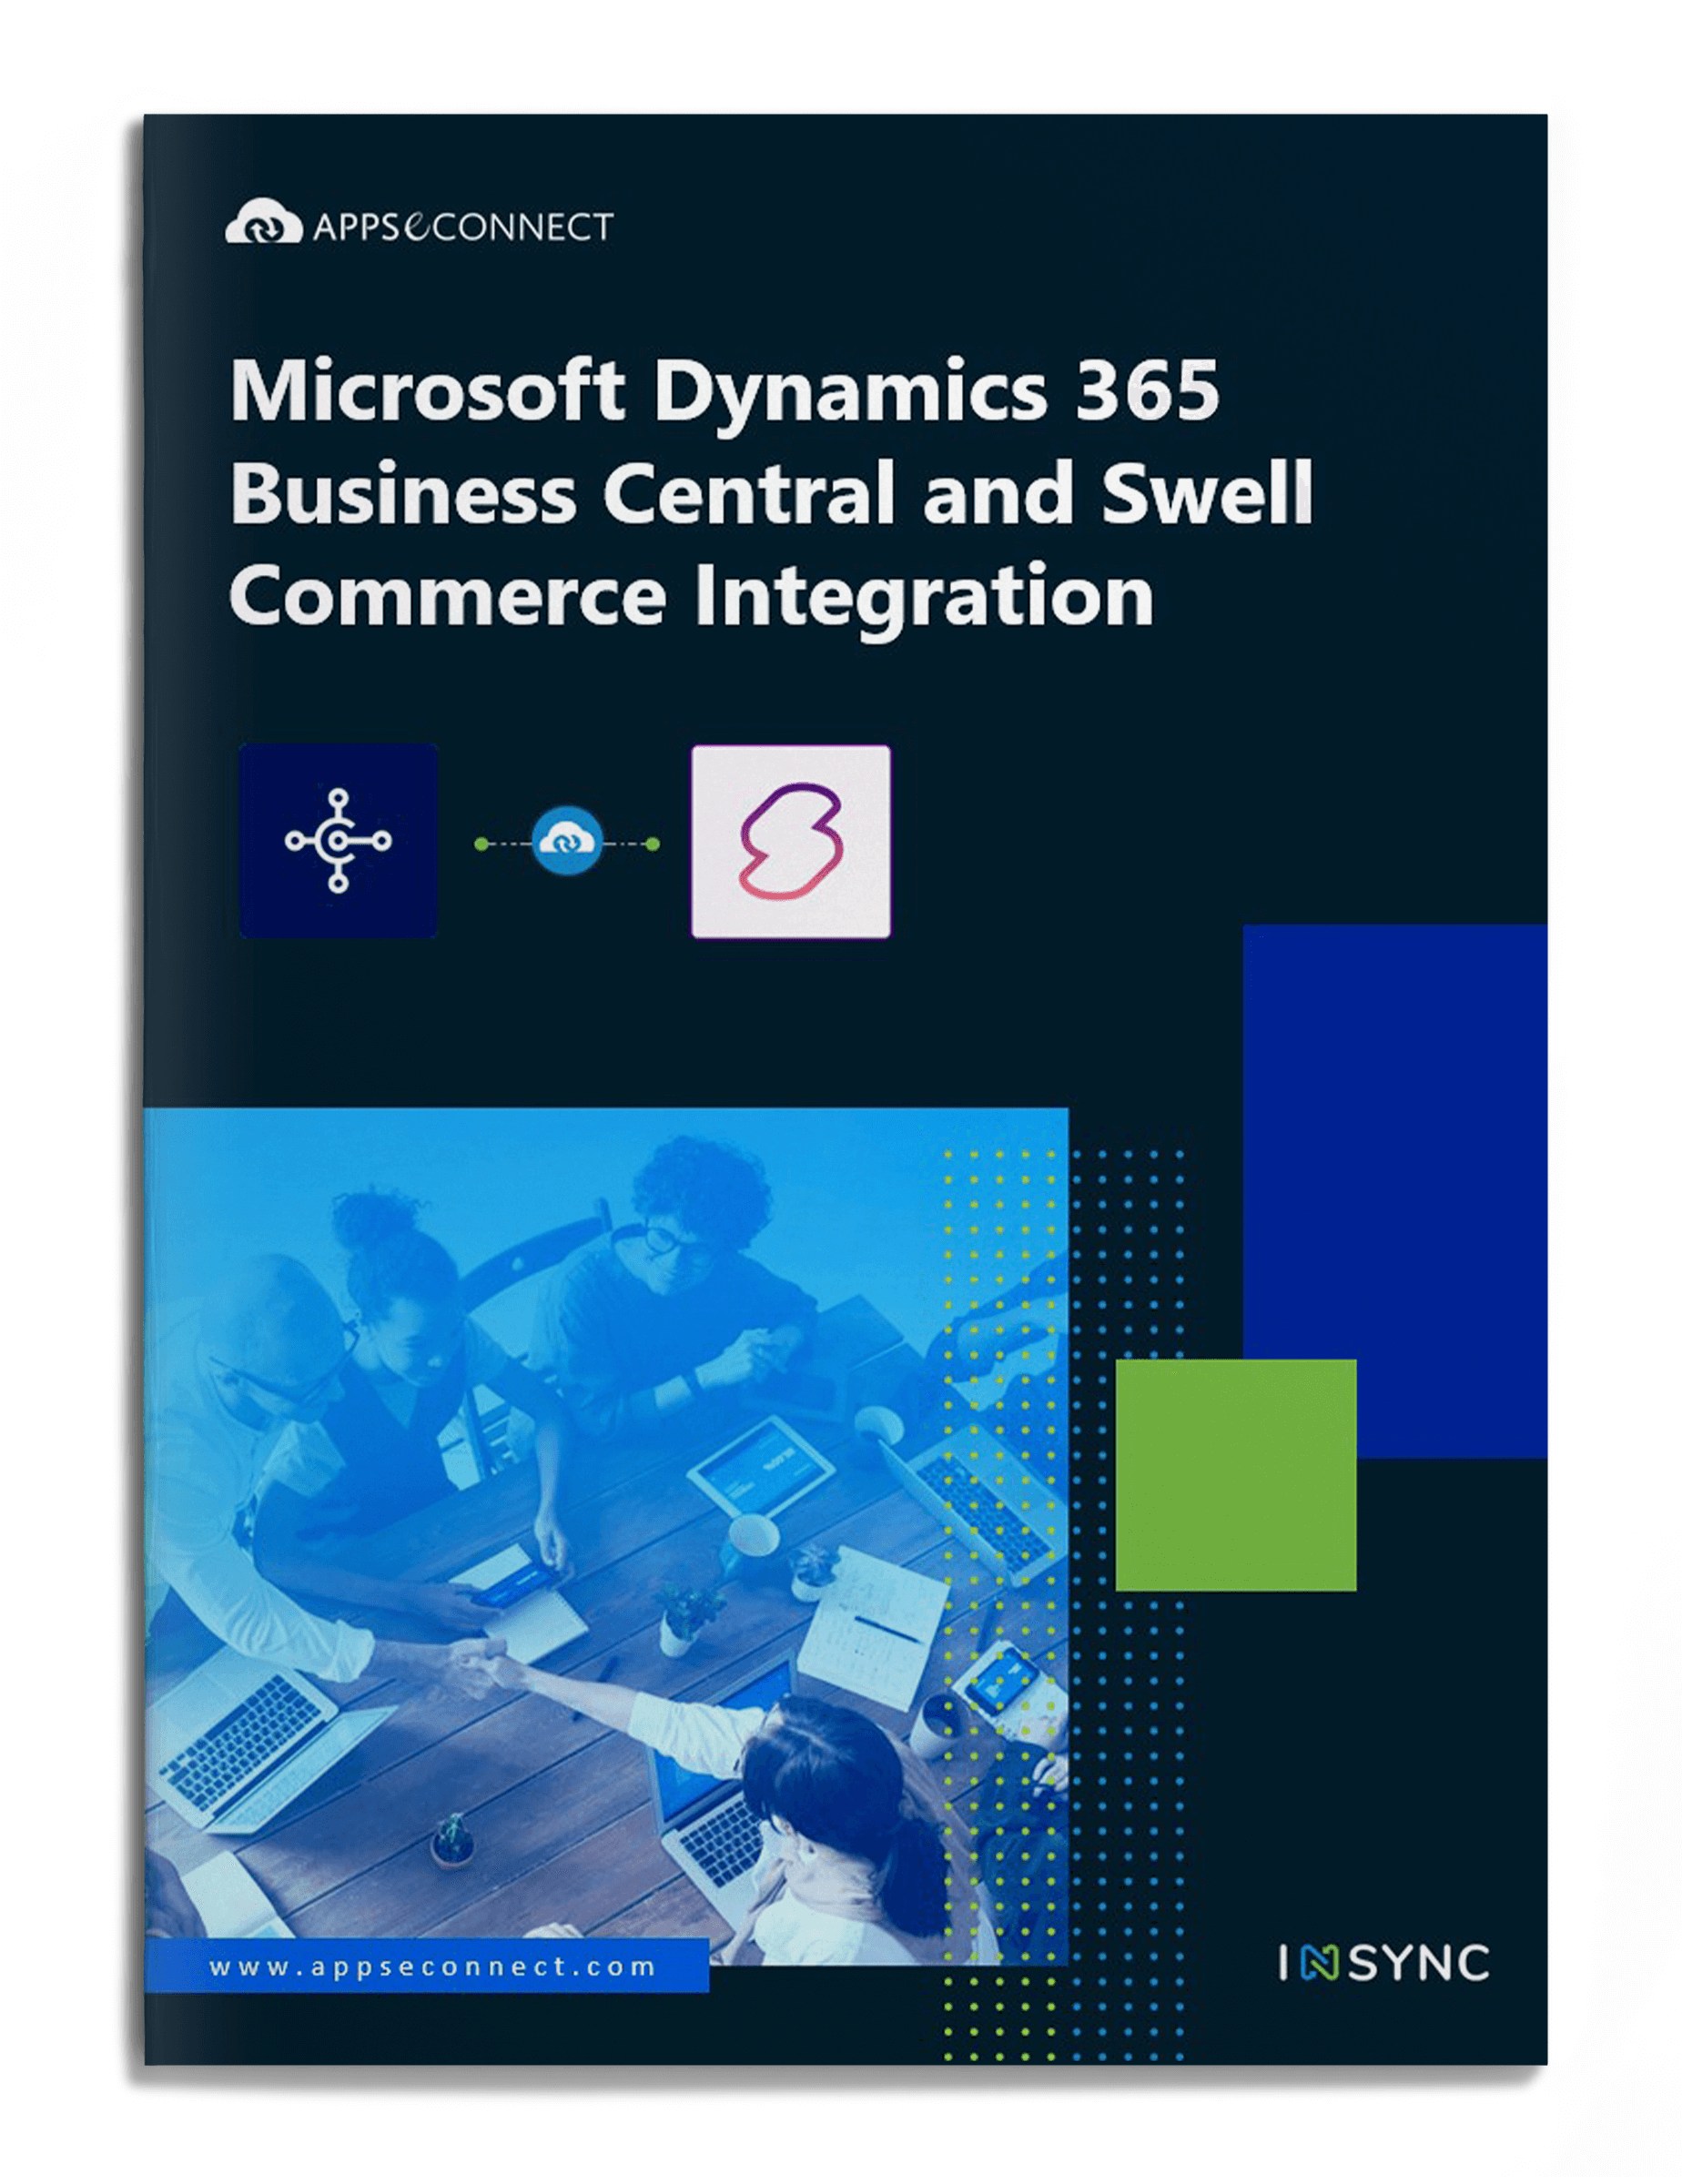 microsoft-dynamics-365-business-central-erp-swell-integration-brochure-cover